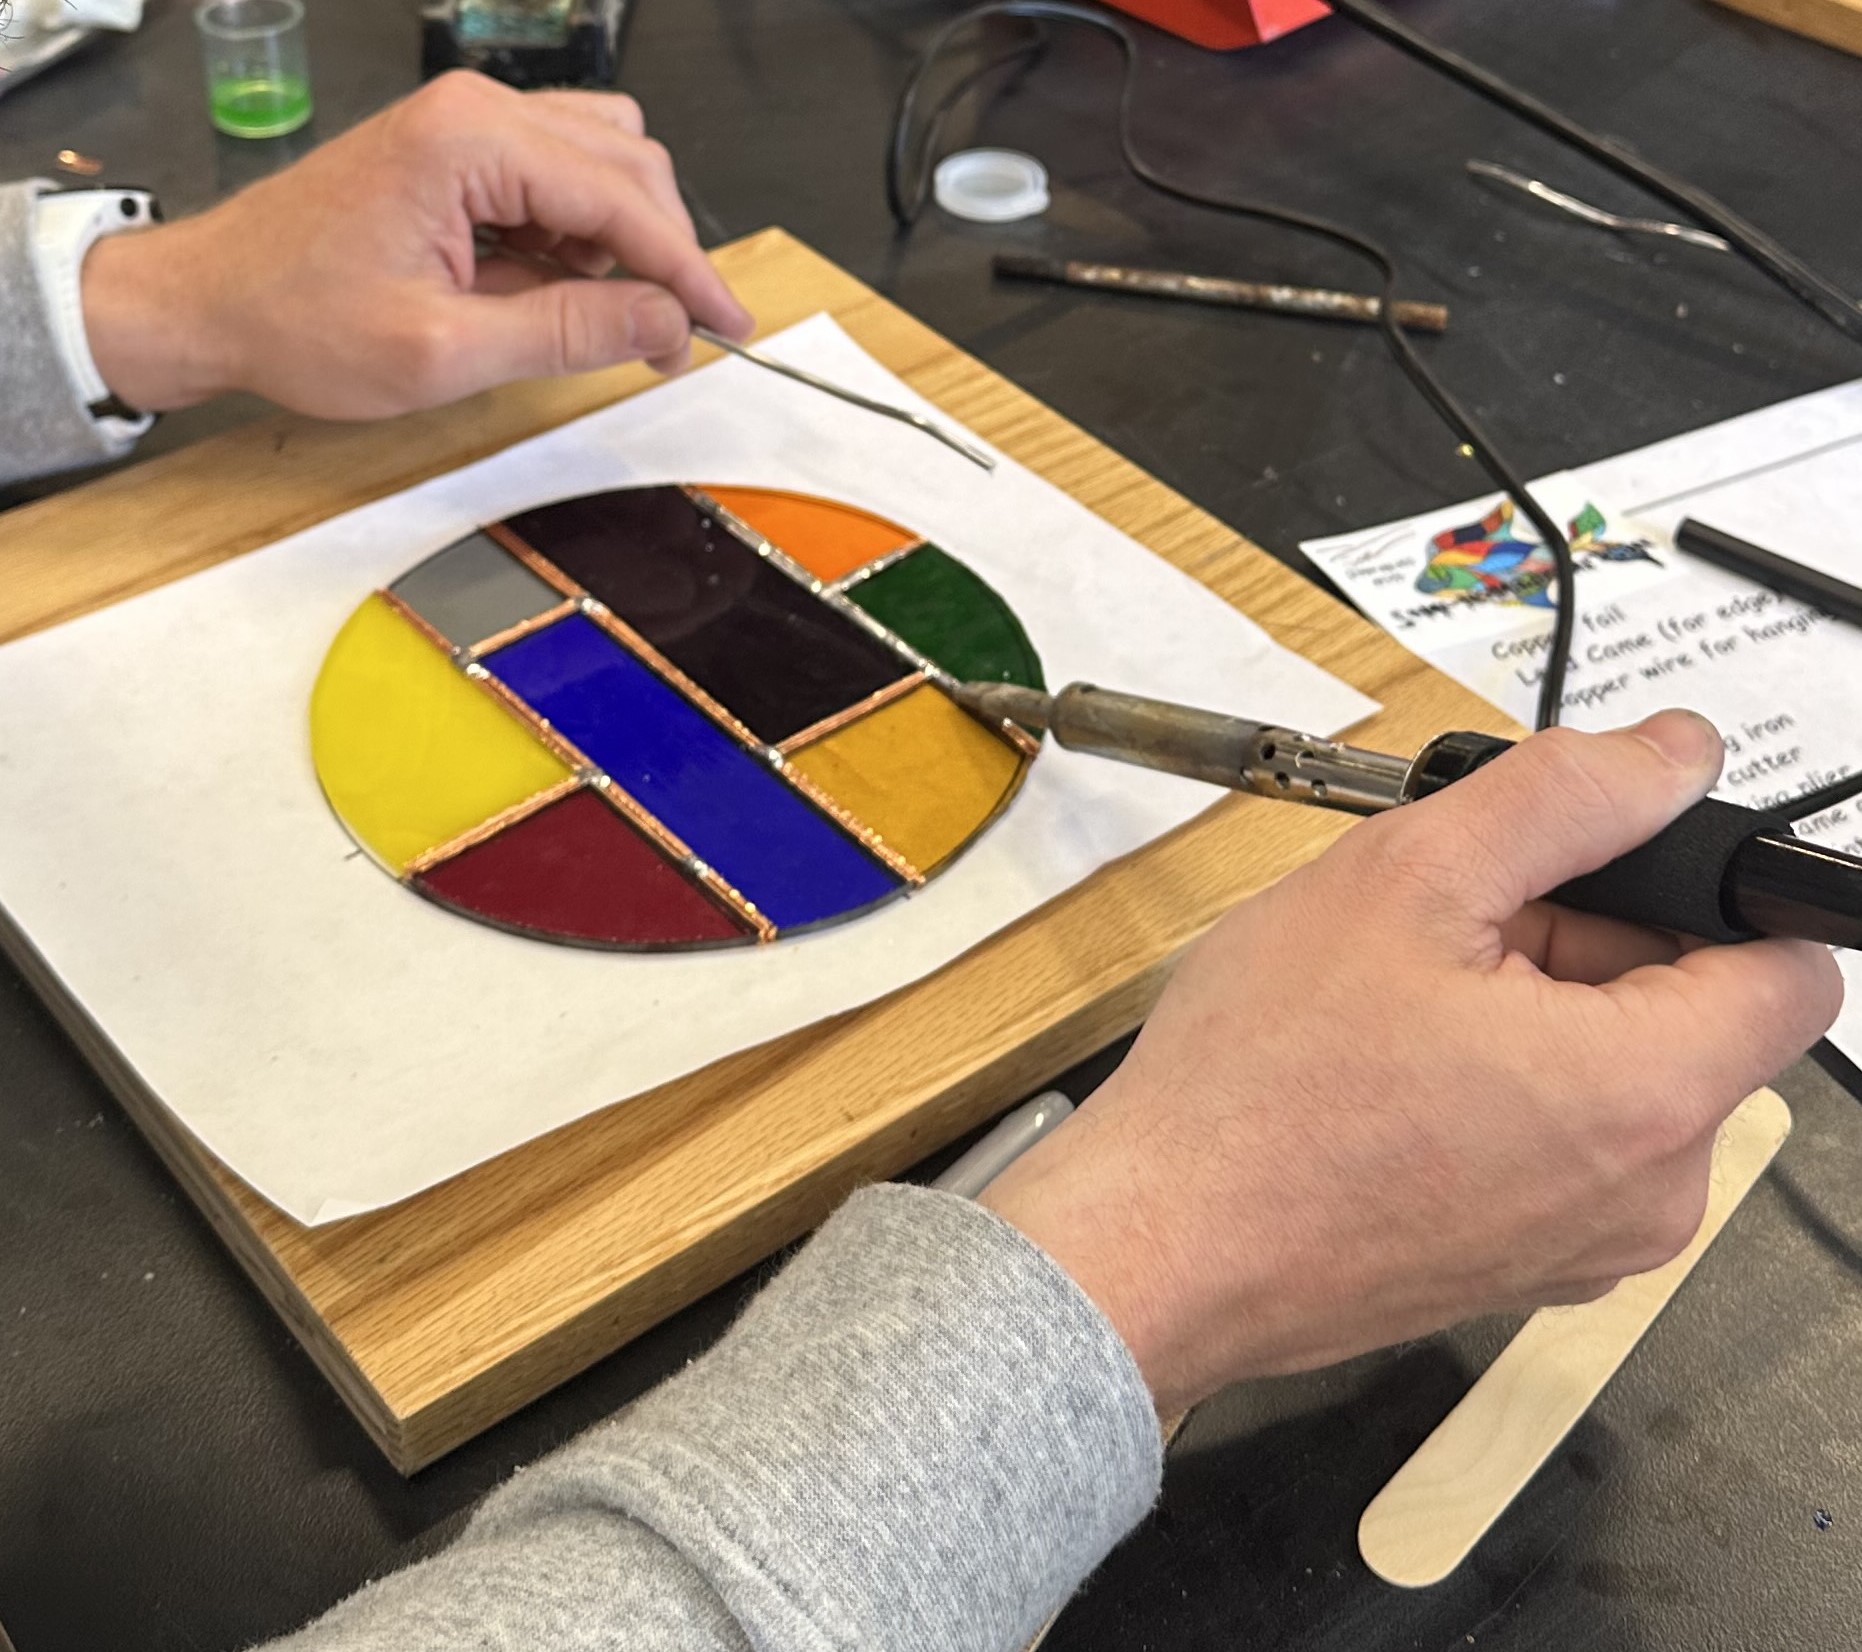 Recommended Tools For Stained Glass Making - Everything Stained Glass